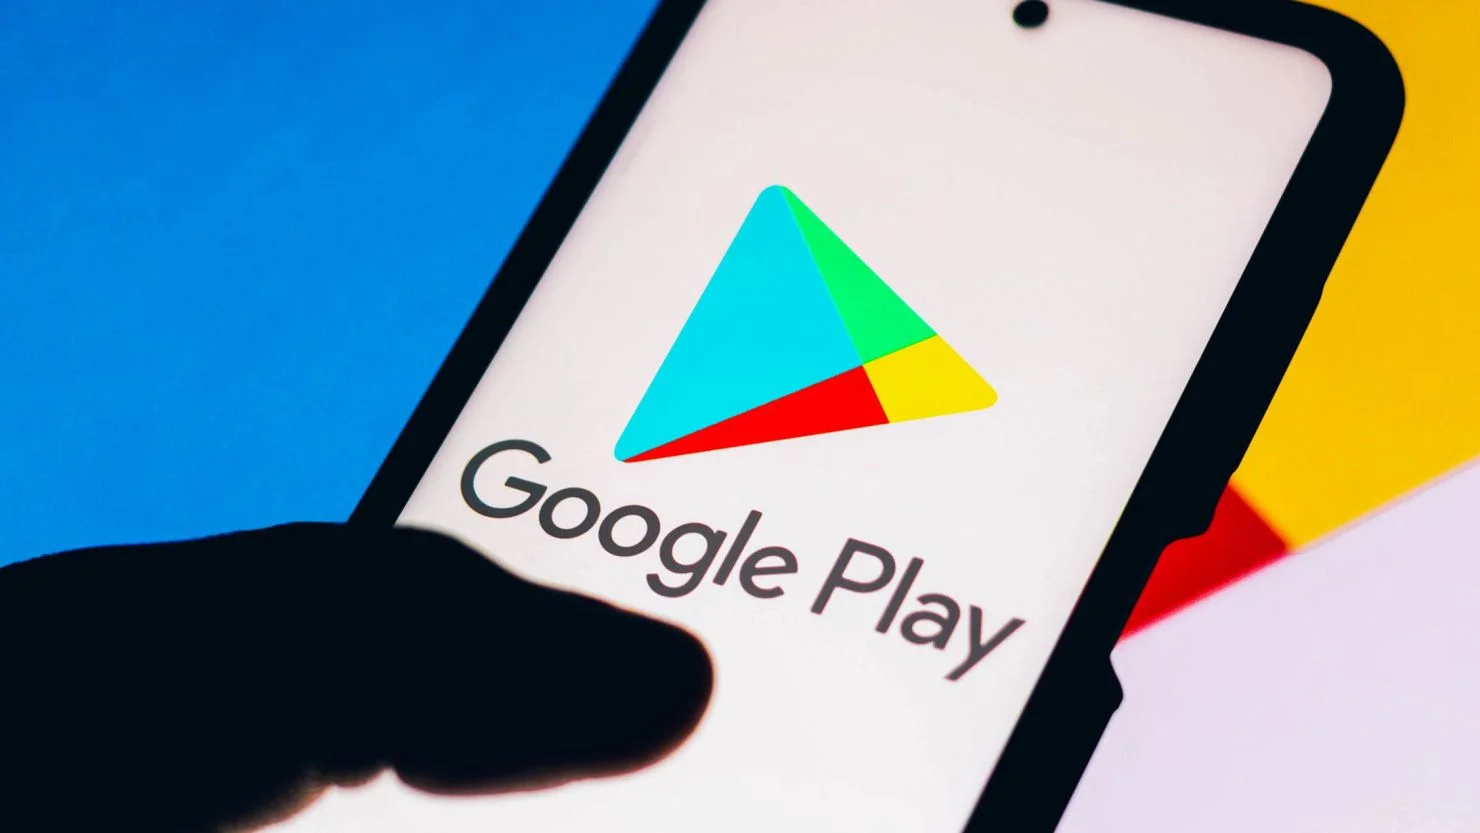 How to Get Apps That Are Not in the Google Play Store